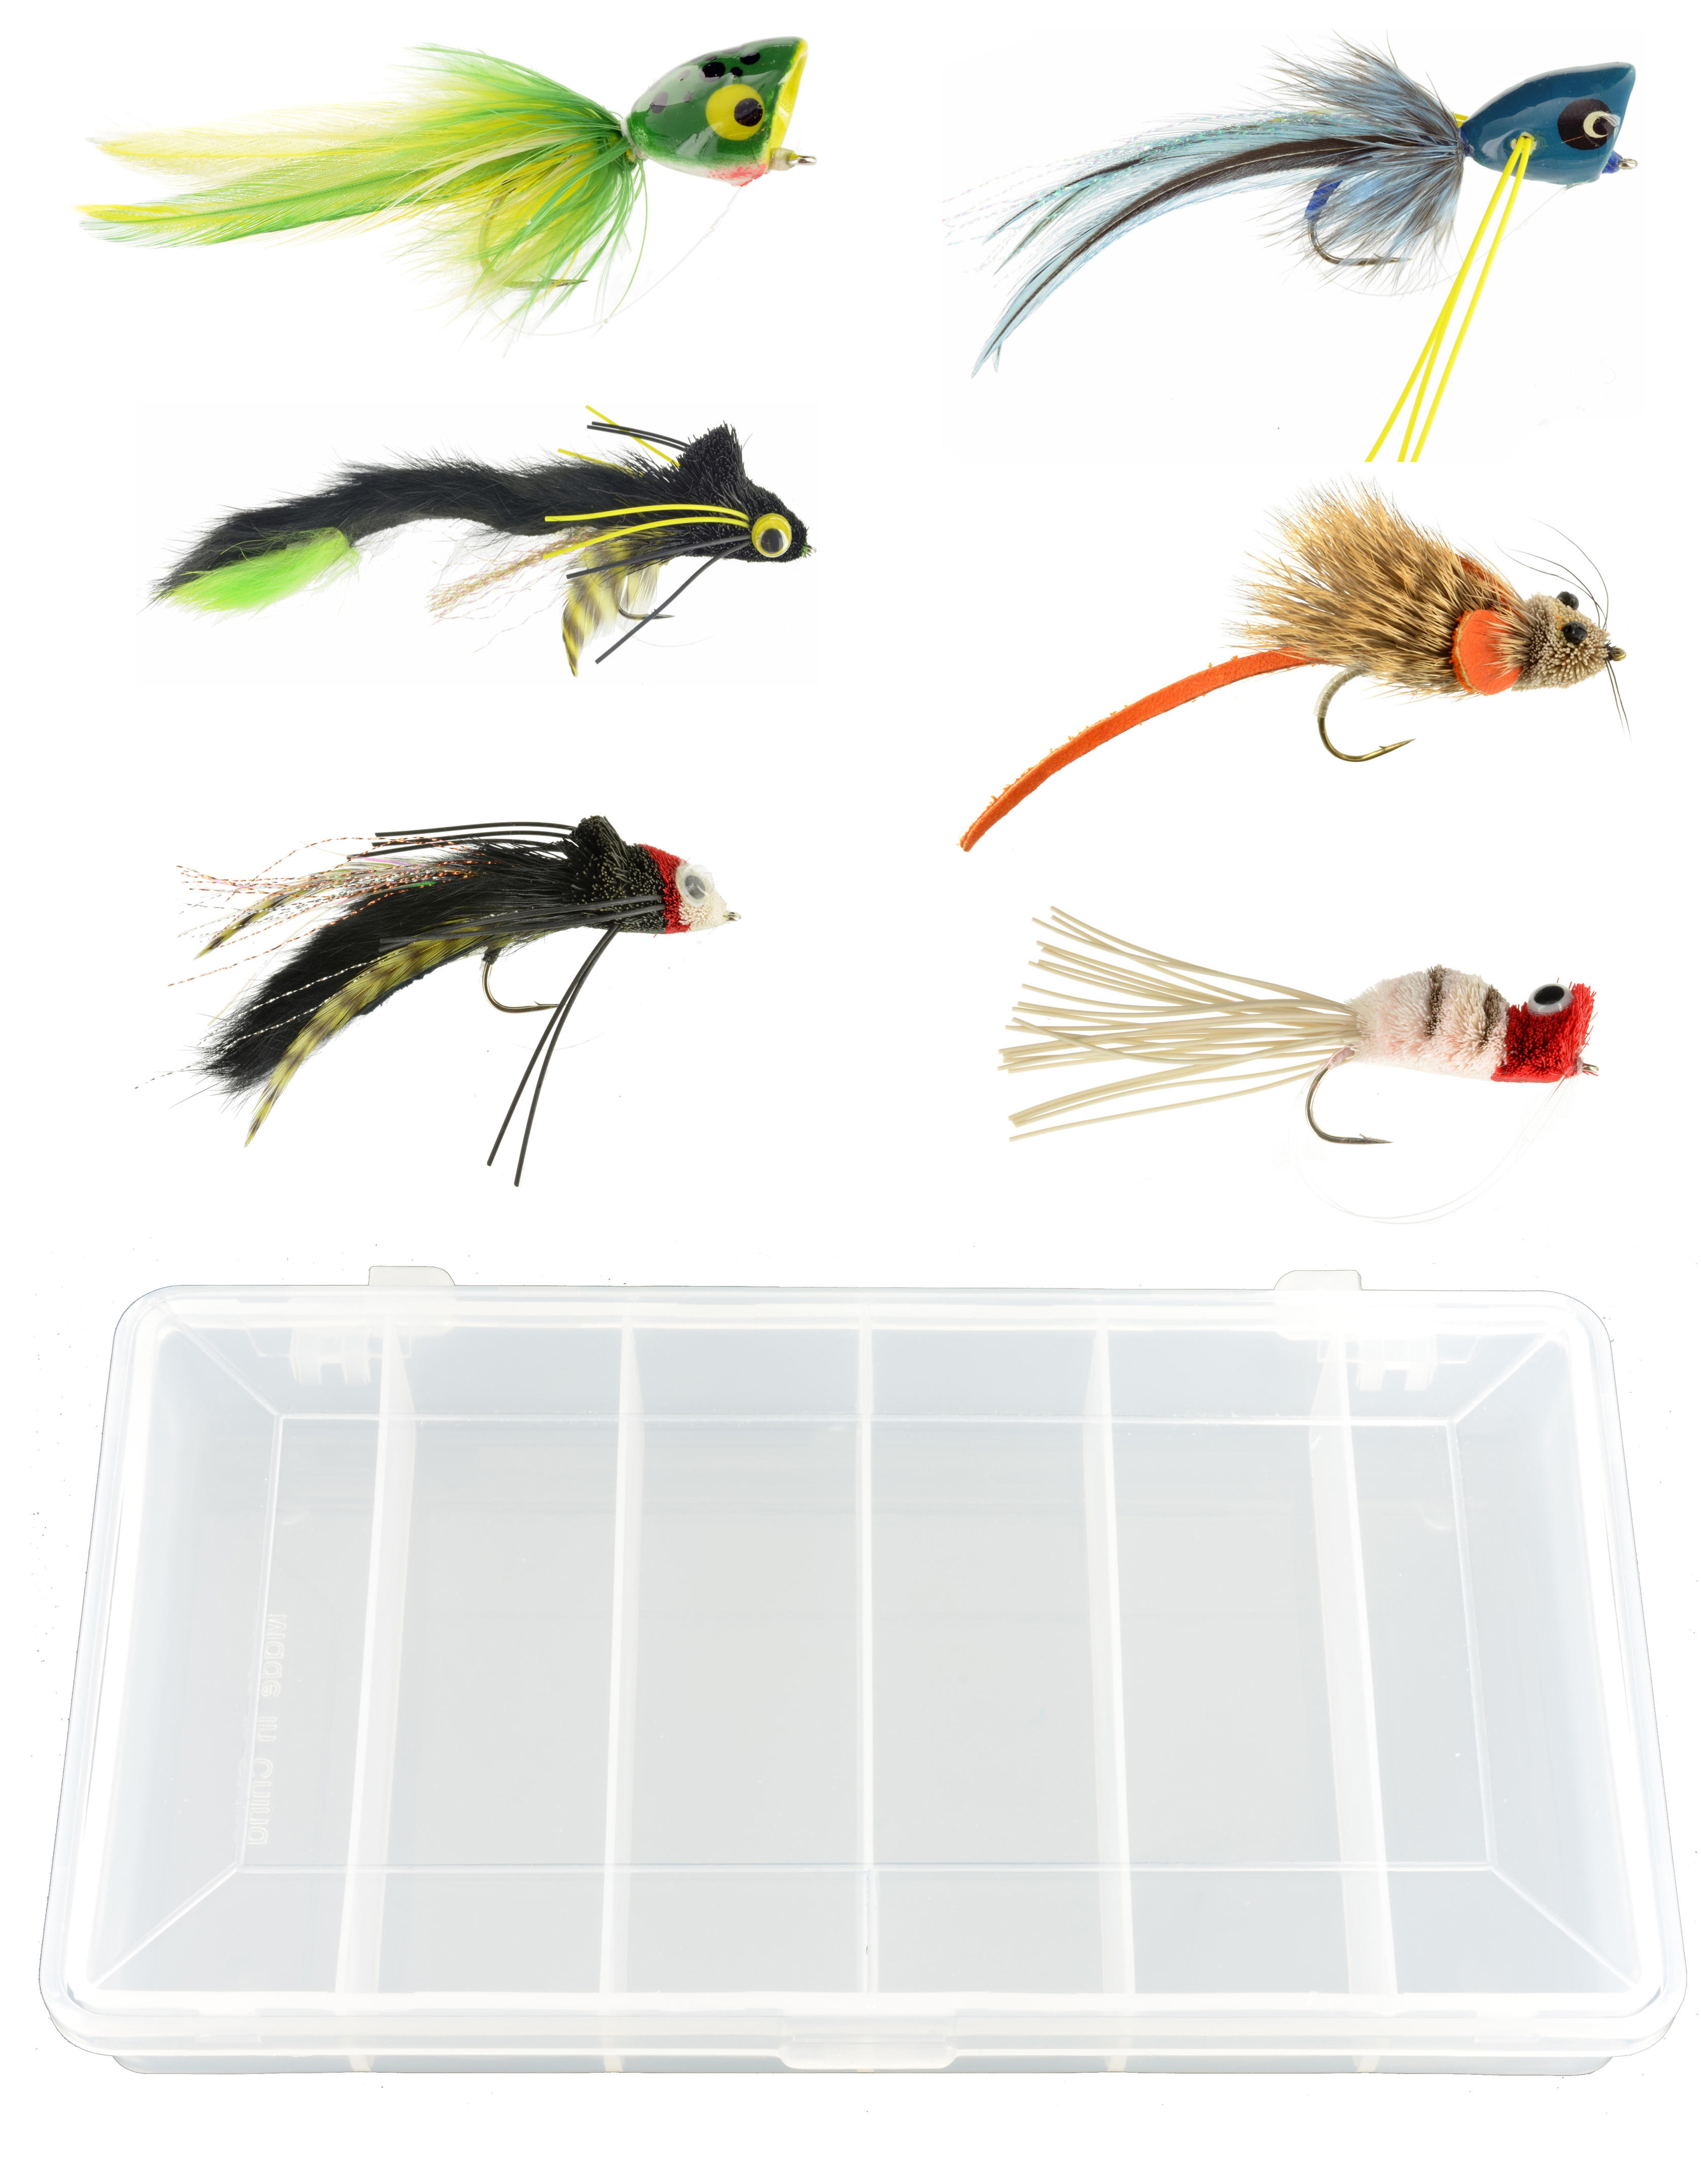 Top Water Bass Pike Assortment Flies Fly Box Fly Fishing, 40% OFF